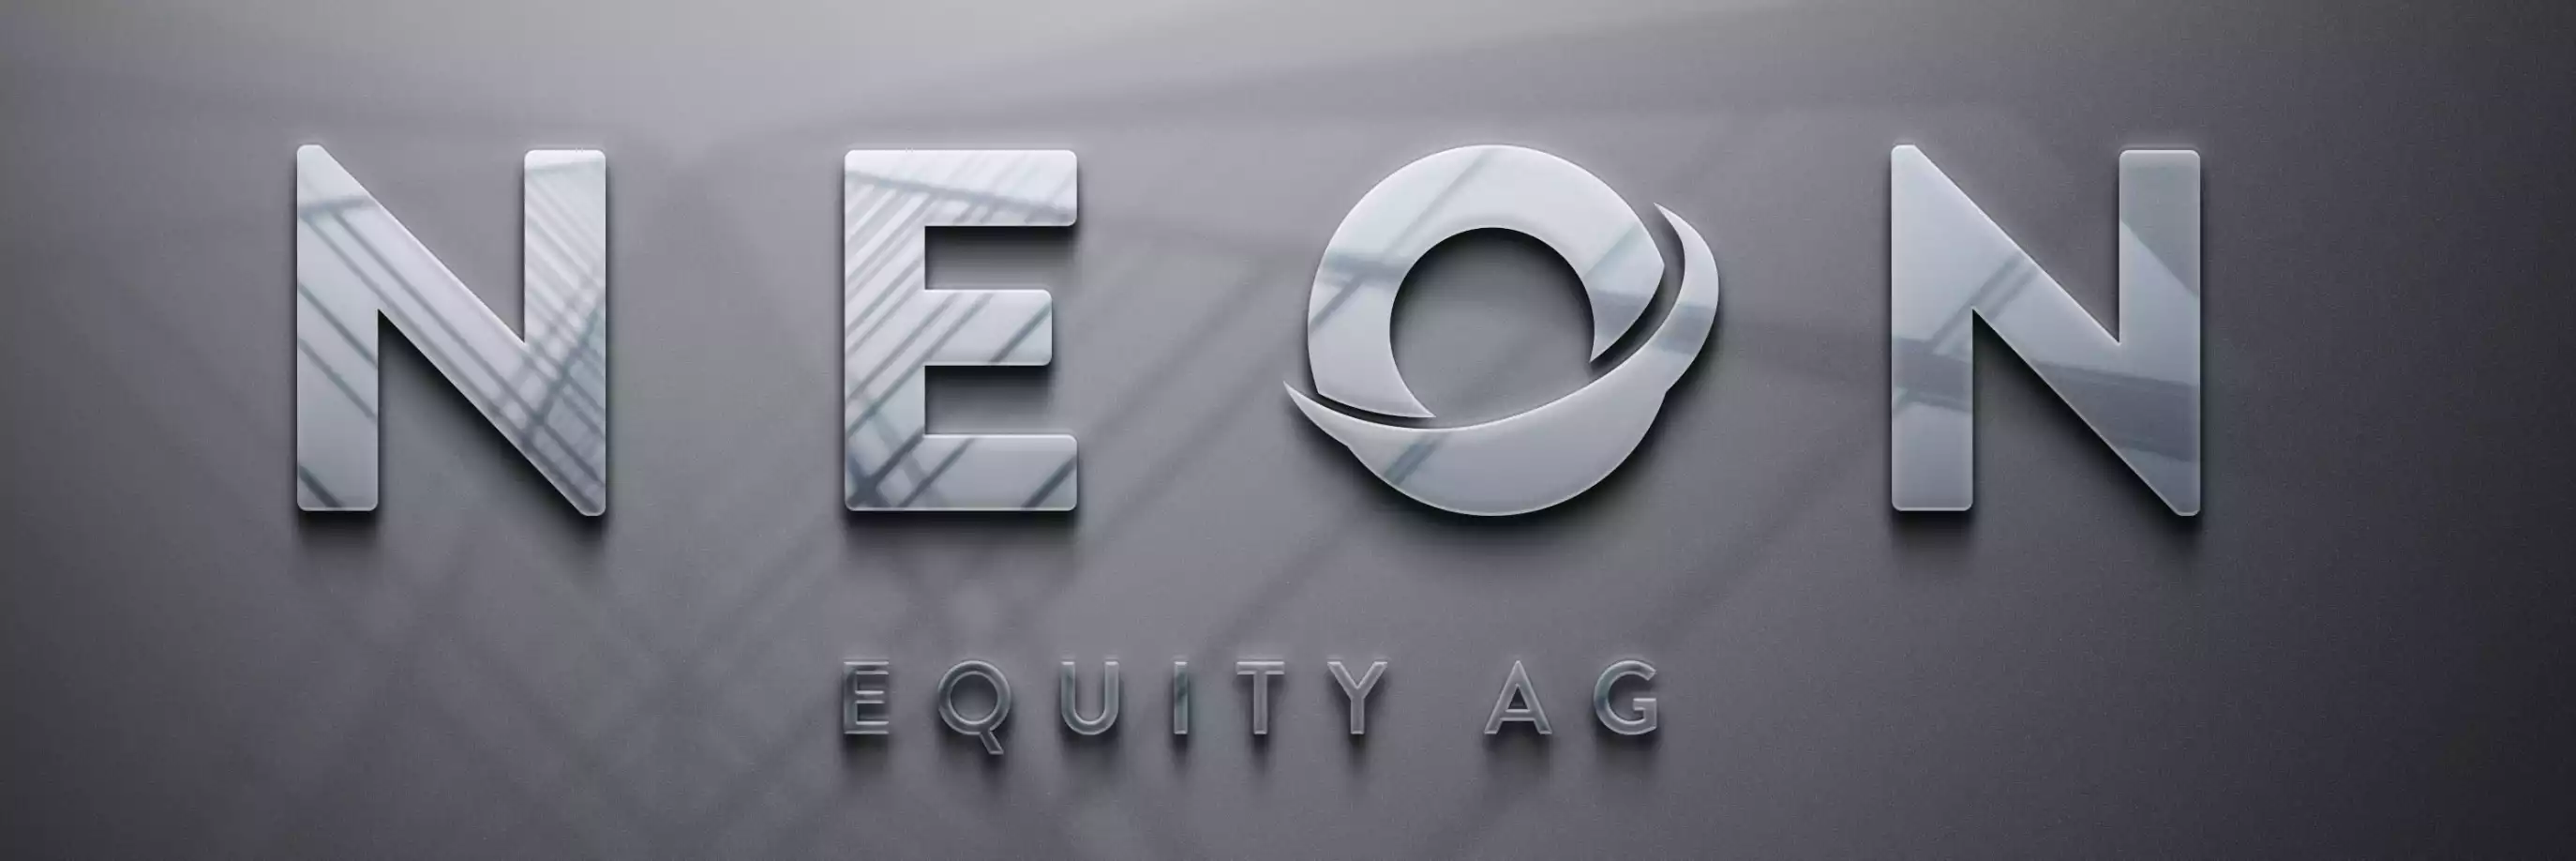 NEON EQUITY AG - NEON EQUITY AG